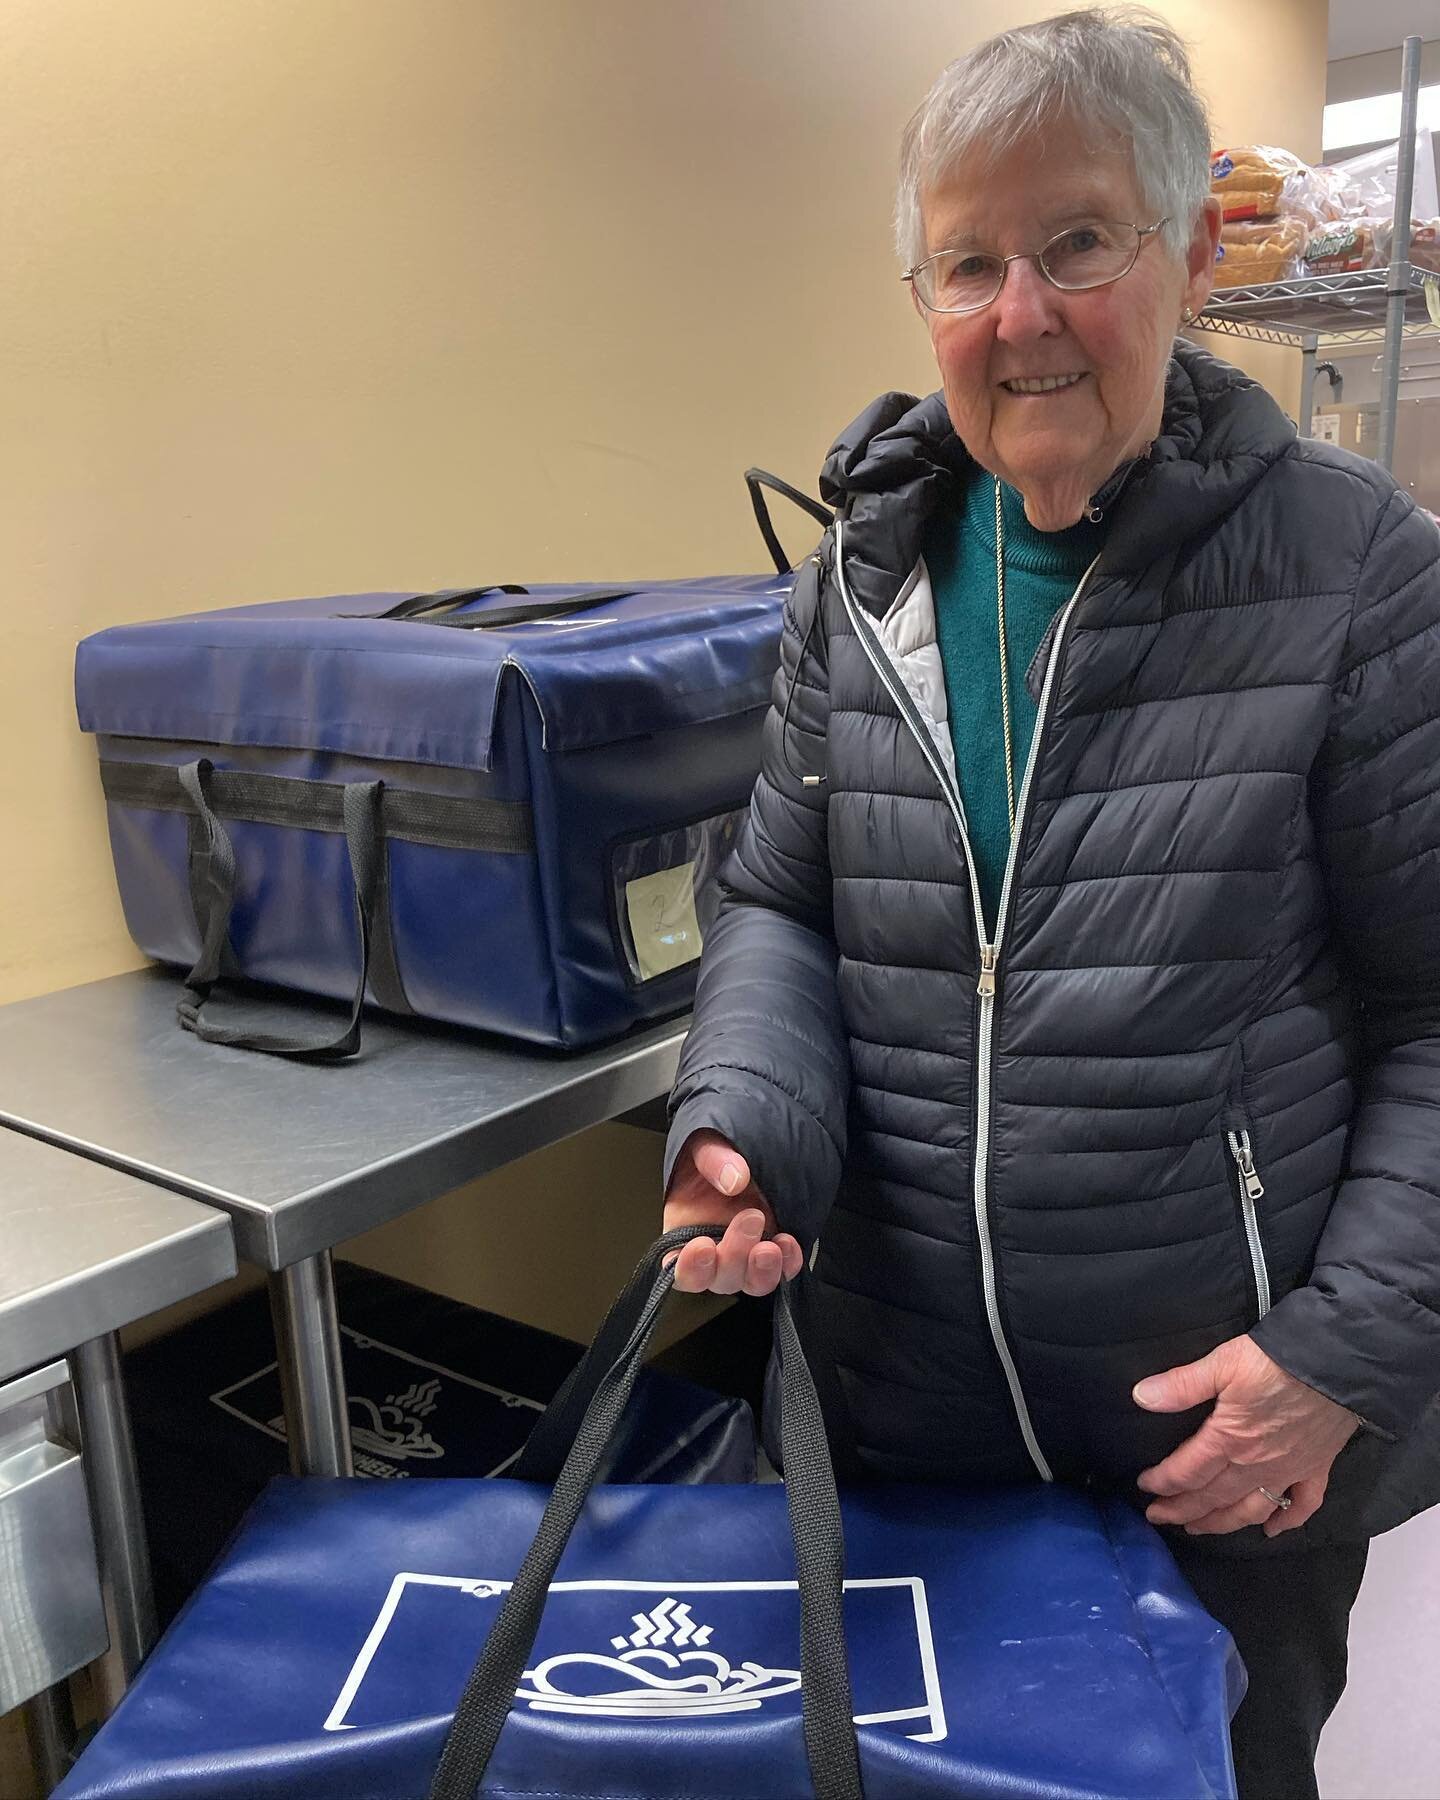 My mother, Rosaleen Mahoney, is a founding member of Summerside Meals on Wheels, from way back around 1978. She worked as a coordinator  at Wedgewood Manor for about ten years, and today, in her eighties, still sits on the board. Here she is proudly 